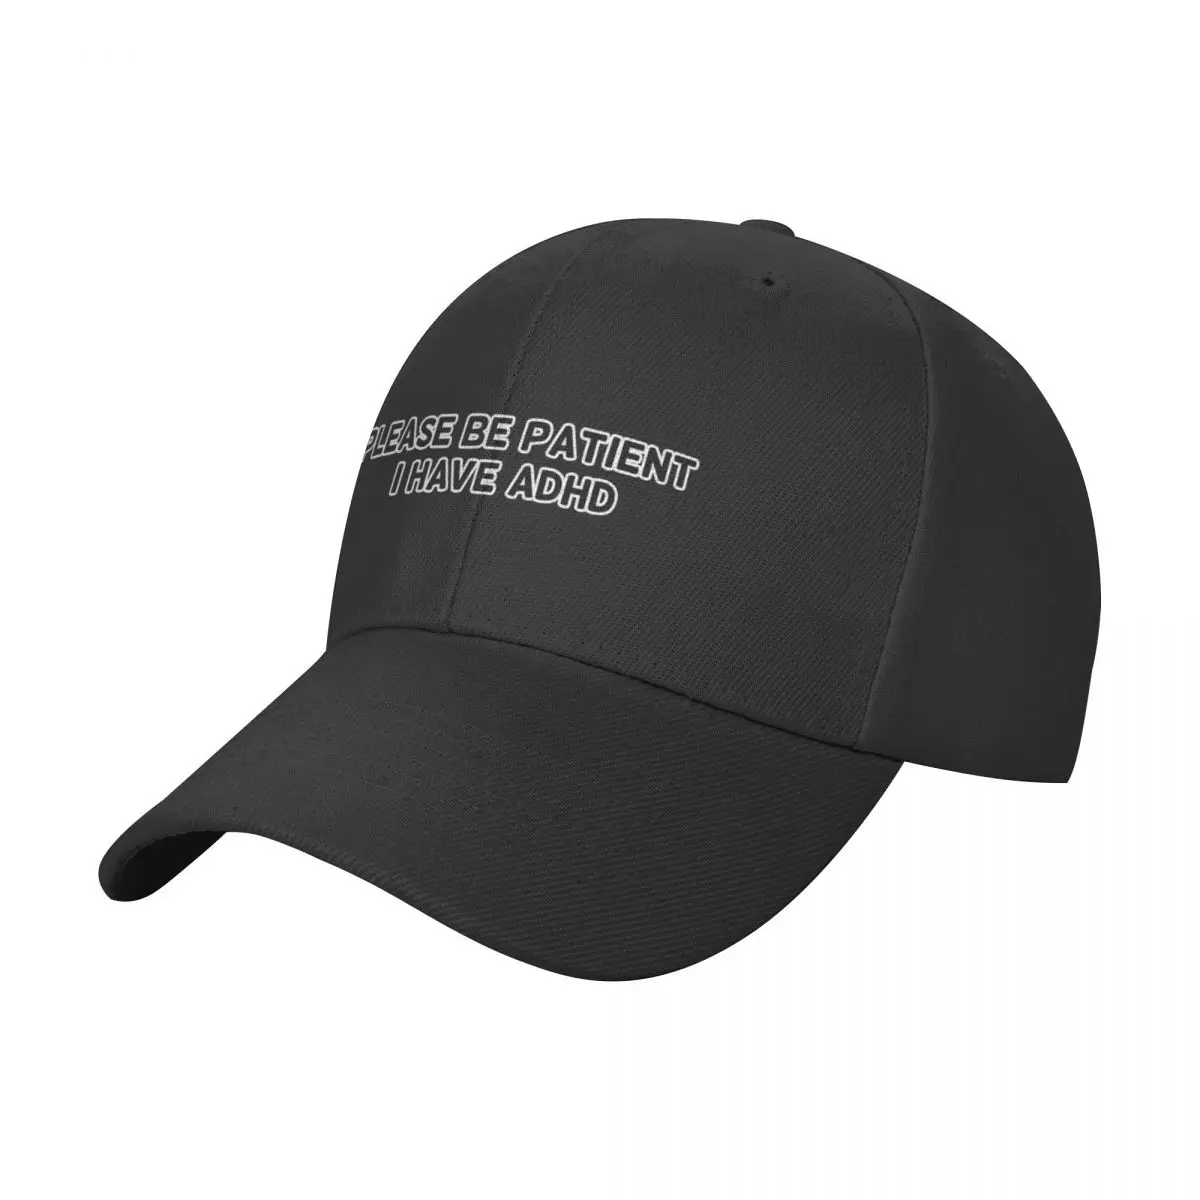 

Please be patient, I have ADHD Baseball Cap funny hat Hat Man For The Sun Golf Men Women's